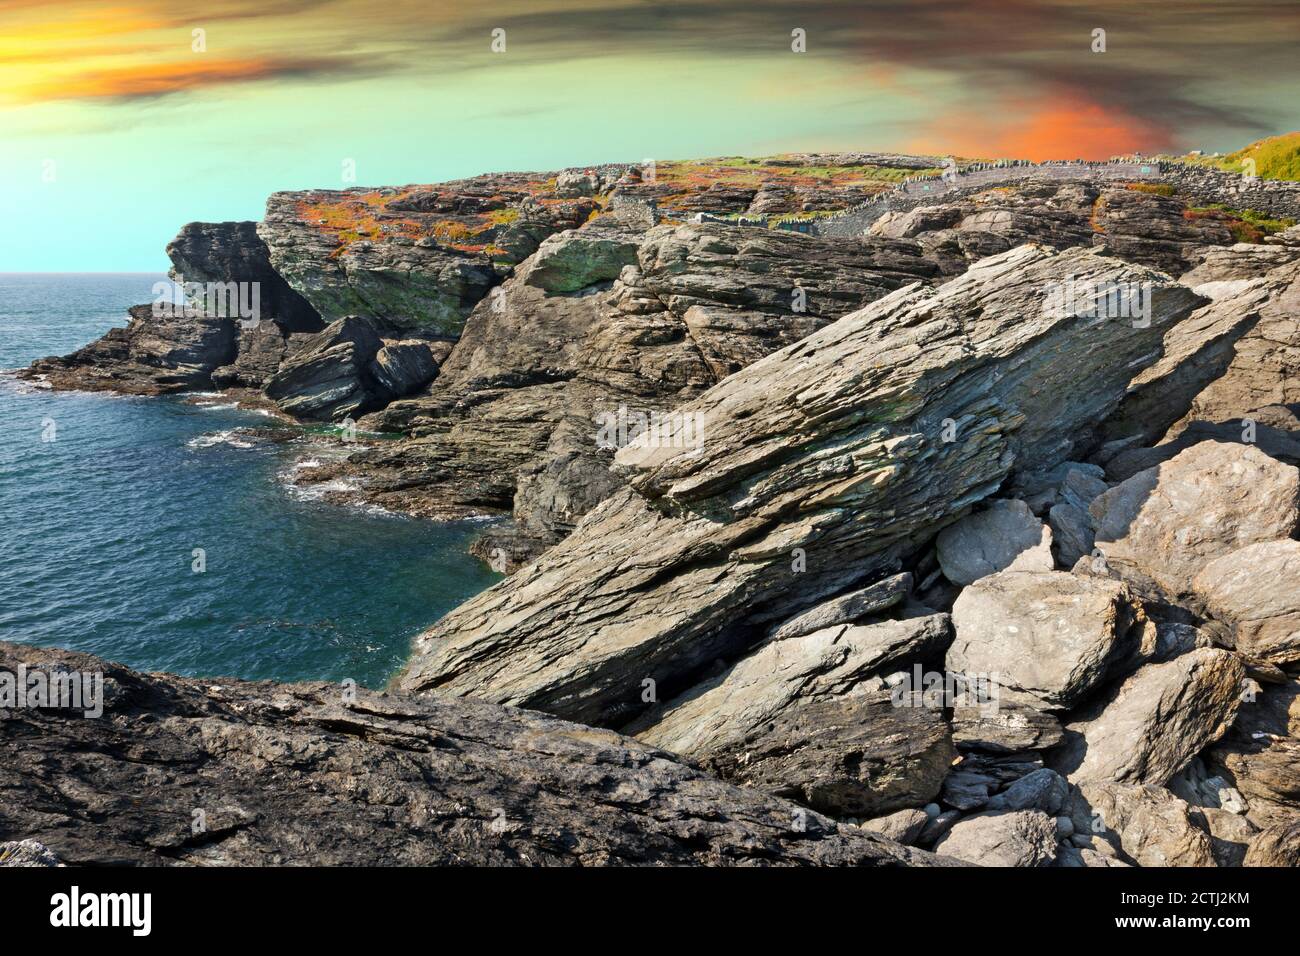 Penrhos Bay near Trearddur on Holy Island, Anglesey, North Wales, is a small cove with dramatic cliffs composed of Precambrian rock. Stock Photo